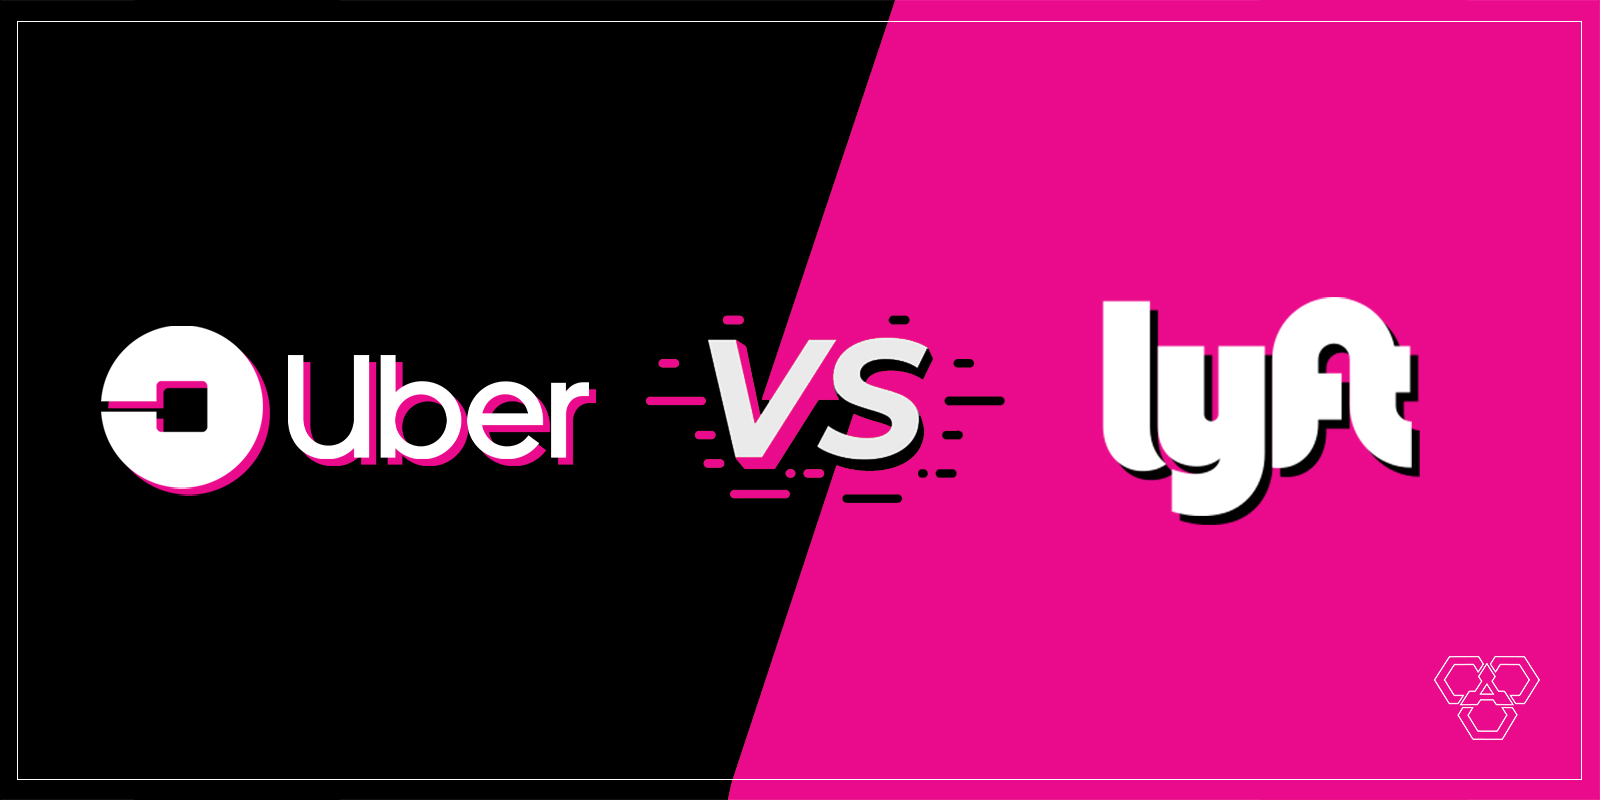 Uber Vs. Lyft: Which One Is Better?